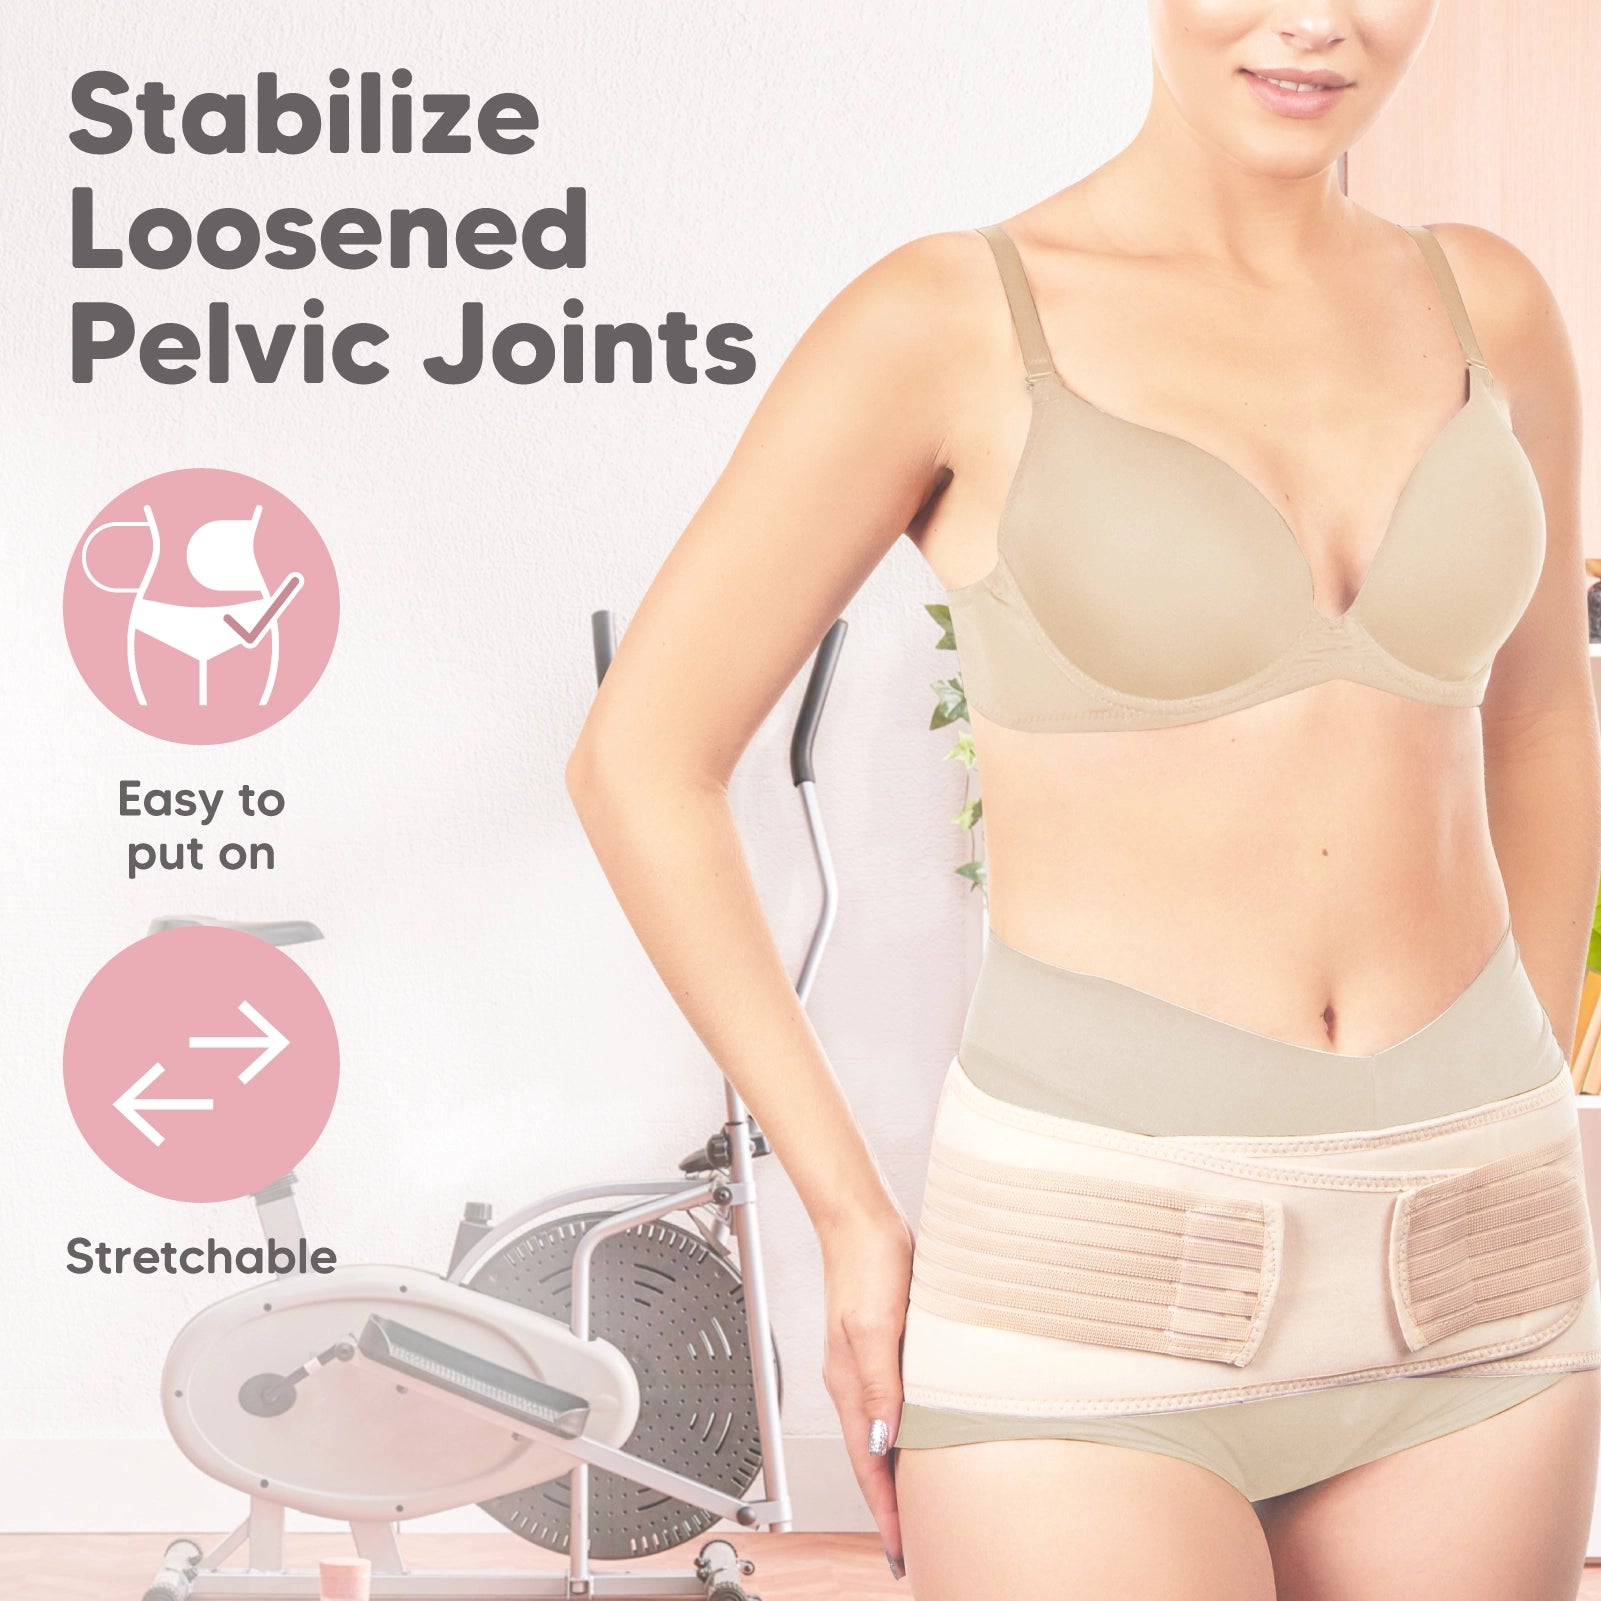 Revive 3-in-1 Postpartum Recovery Support Belt – The Baby'z Room